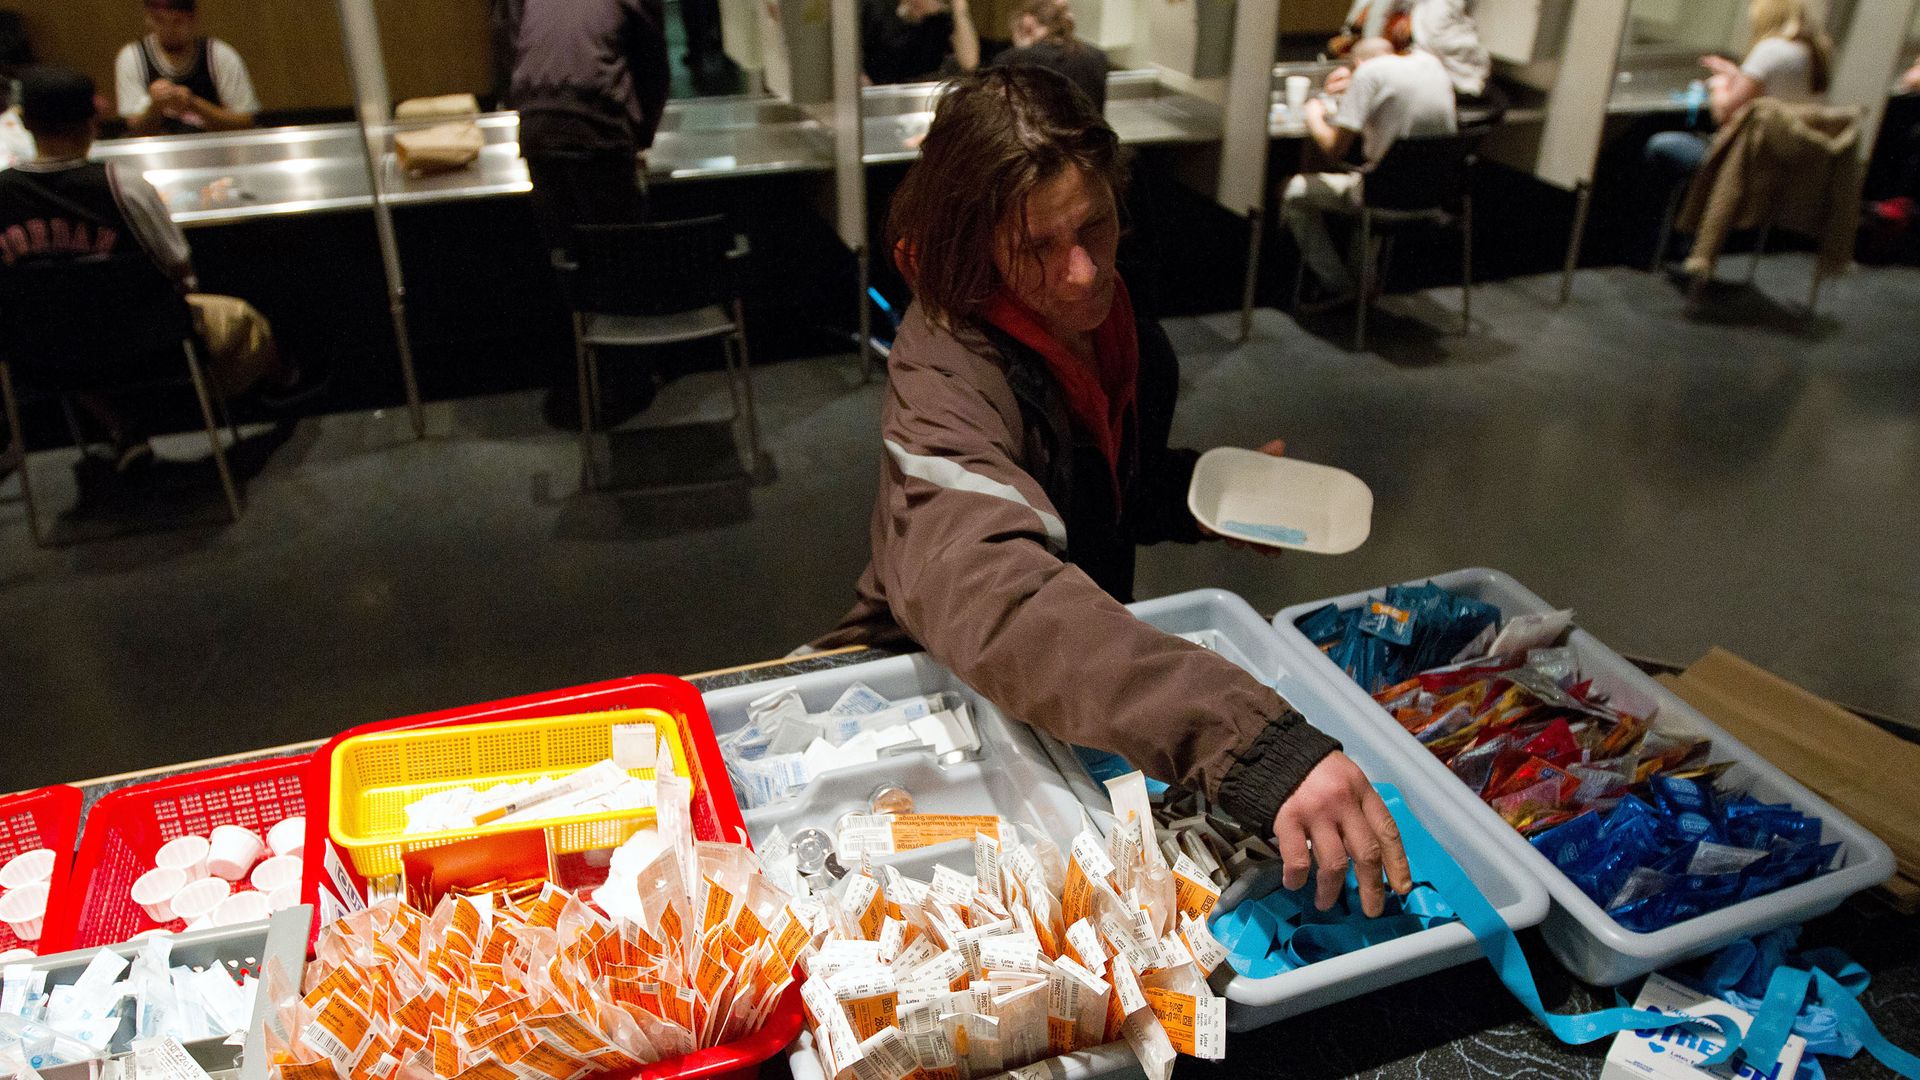 A person collecting needles and other supplies in a supervised injection center in Vancouver, Canada, in May 2011.